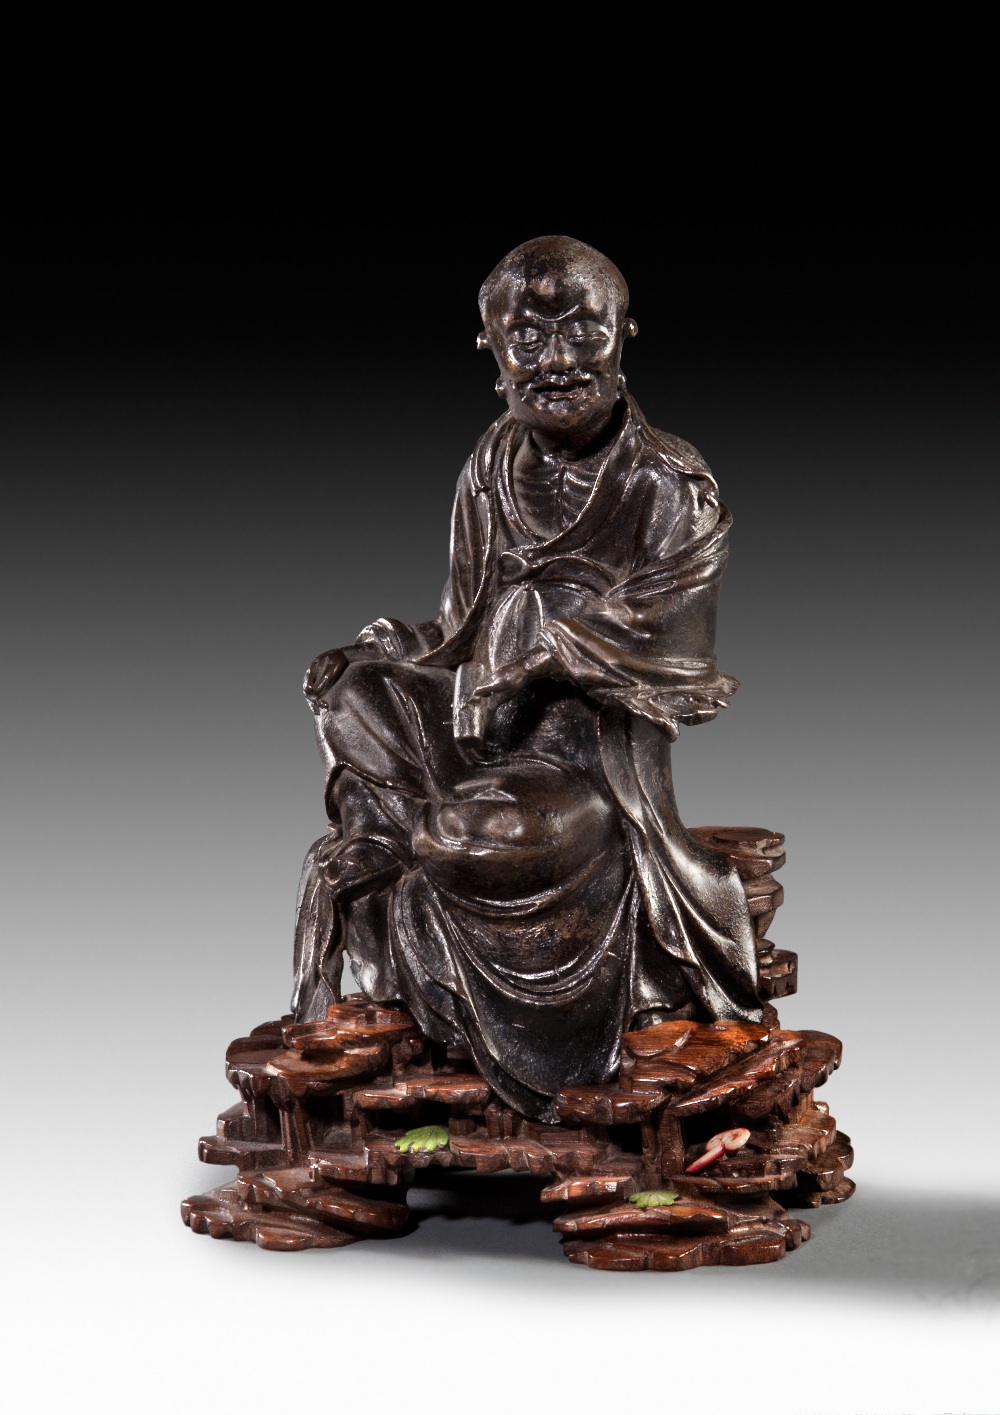 A BRONZE FIGURE OF LUOHAN, LATER MING DYNASTY. H: 20.3 cm.
Seated, with his right hand resting on